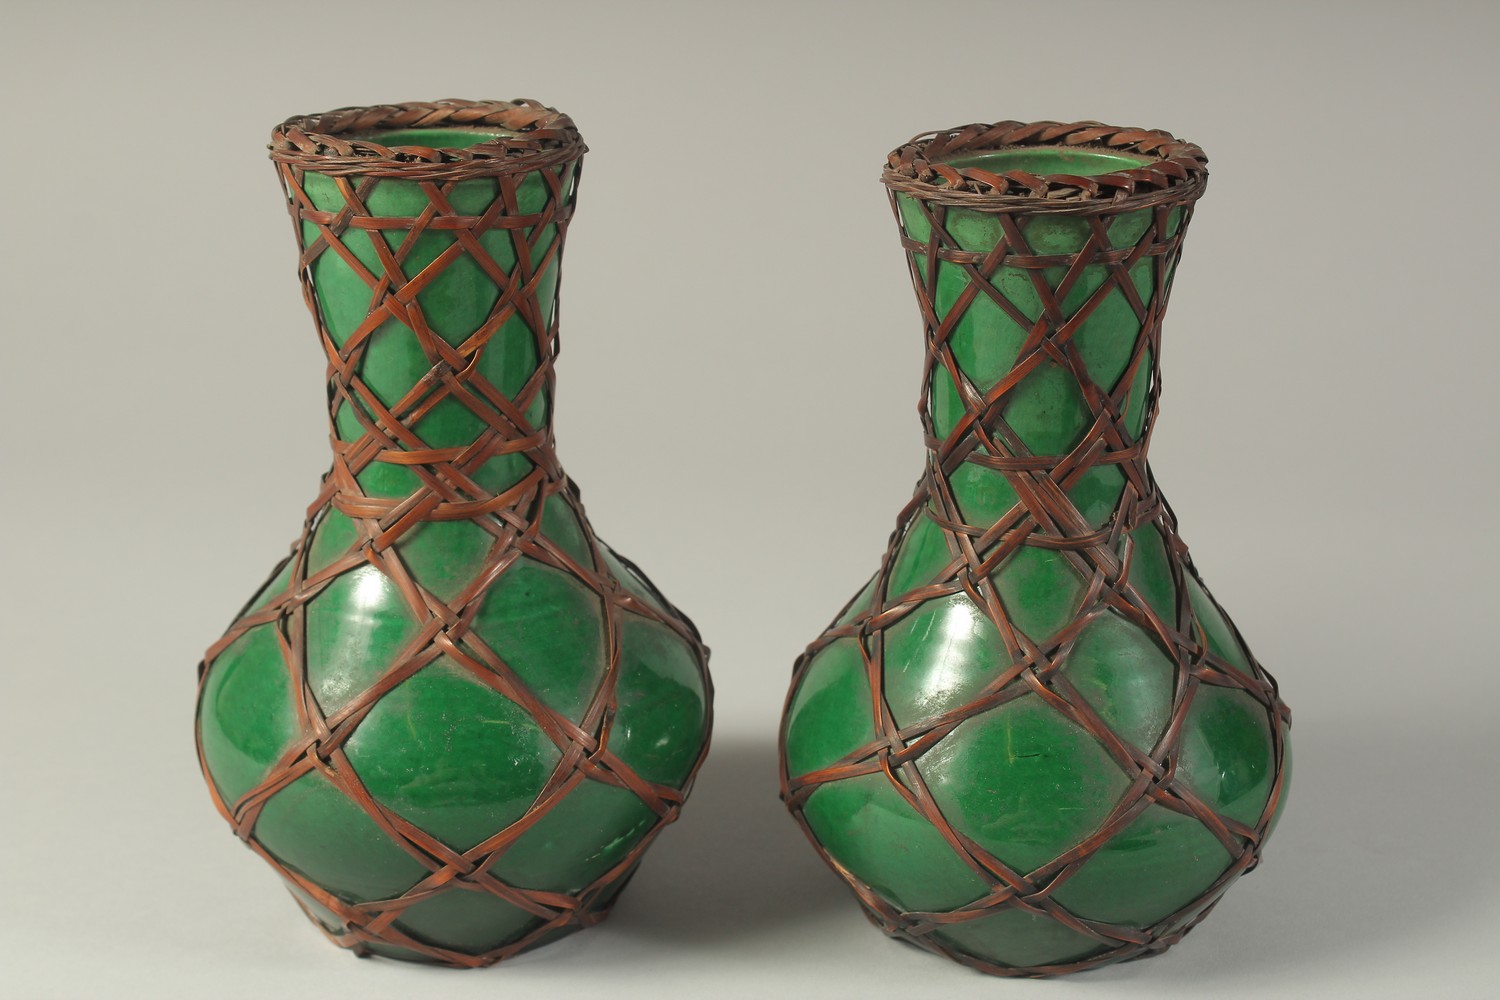 A PAIR OF JAPANESE AWAJI WARE GREEN GLAZED PORCELAIN VASES, with woven bamboo overlay, each with - Image 2 of 4